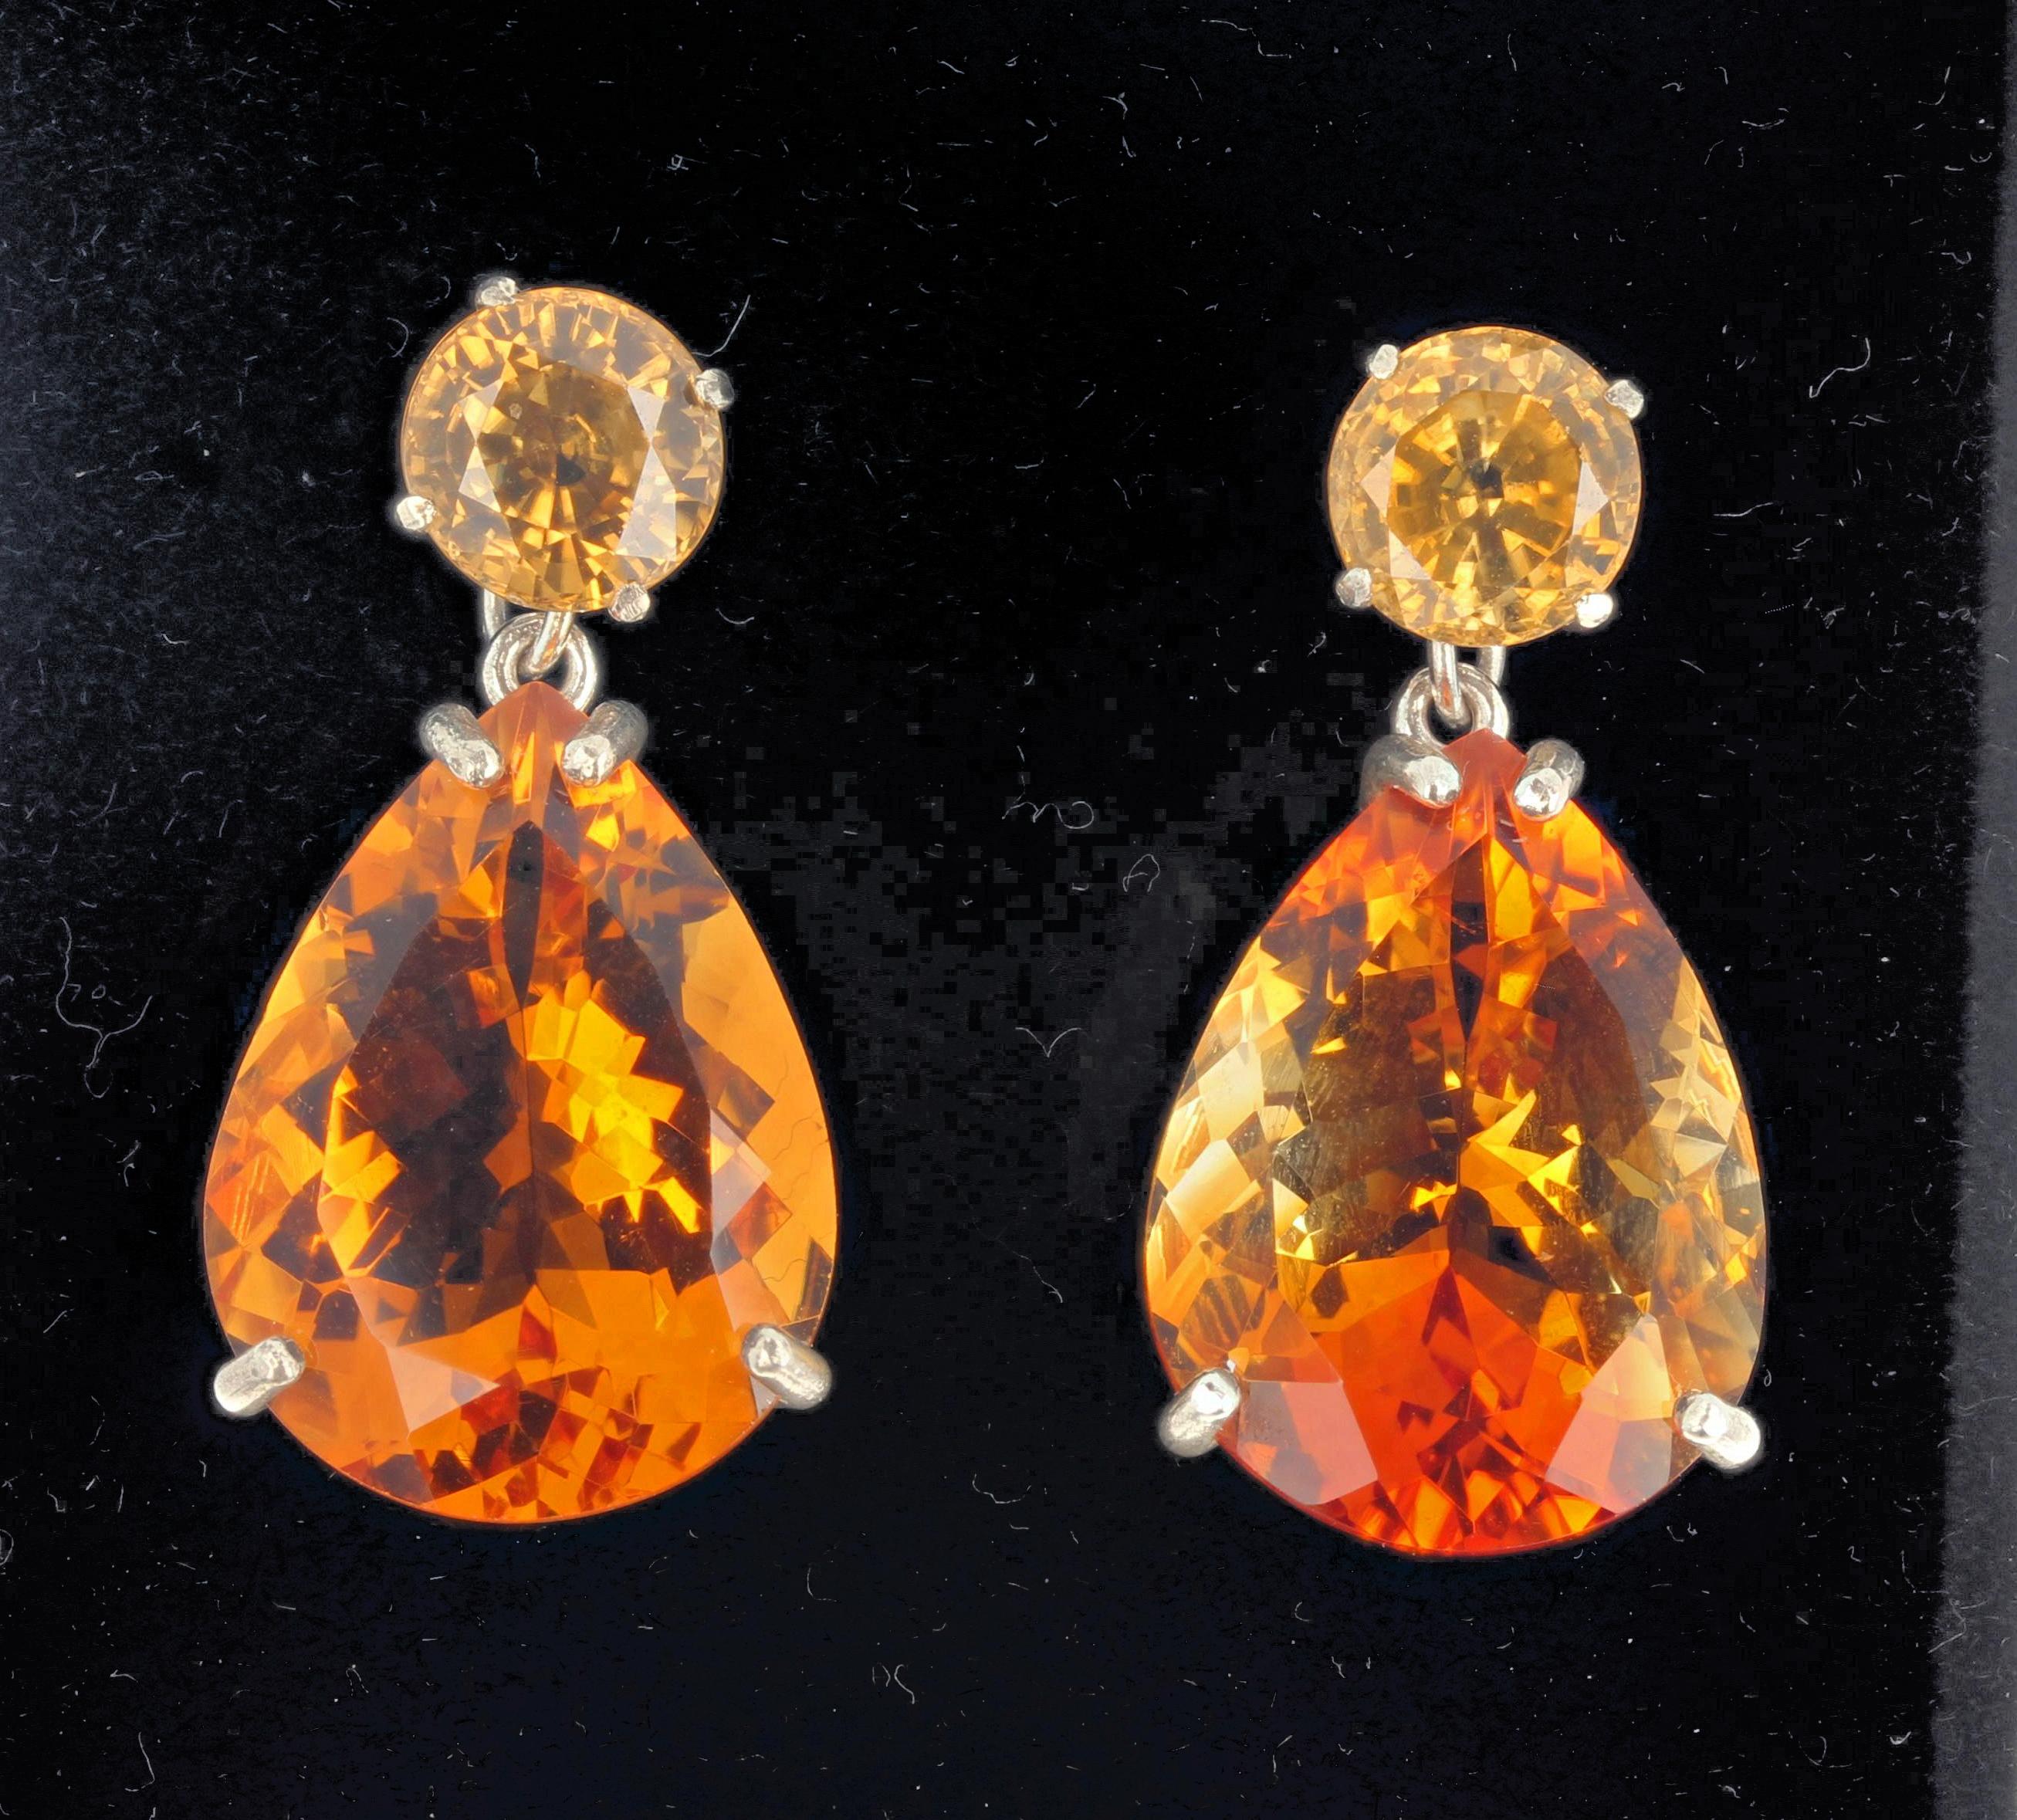 Brilliant yellow 7mm natural round Cambodian Zircons (2.5 carats each) elegantly dangle glittering gemcut pear shaped multicolor natural Citrines (20 carats each - 20 mm x 15 mm) on these sterling silver stud earrings.  There are no black marks in